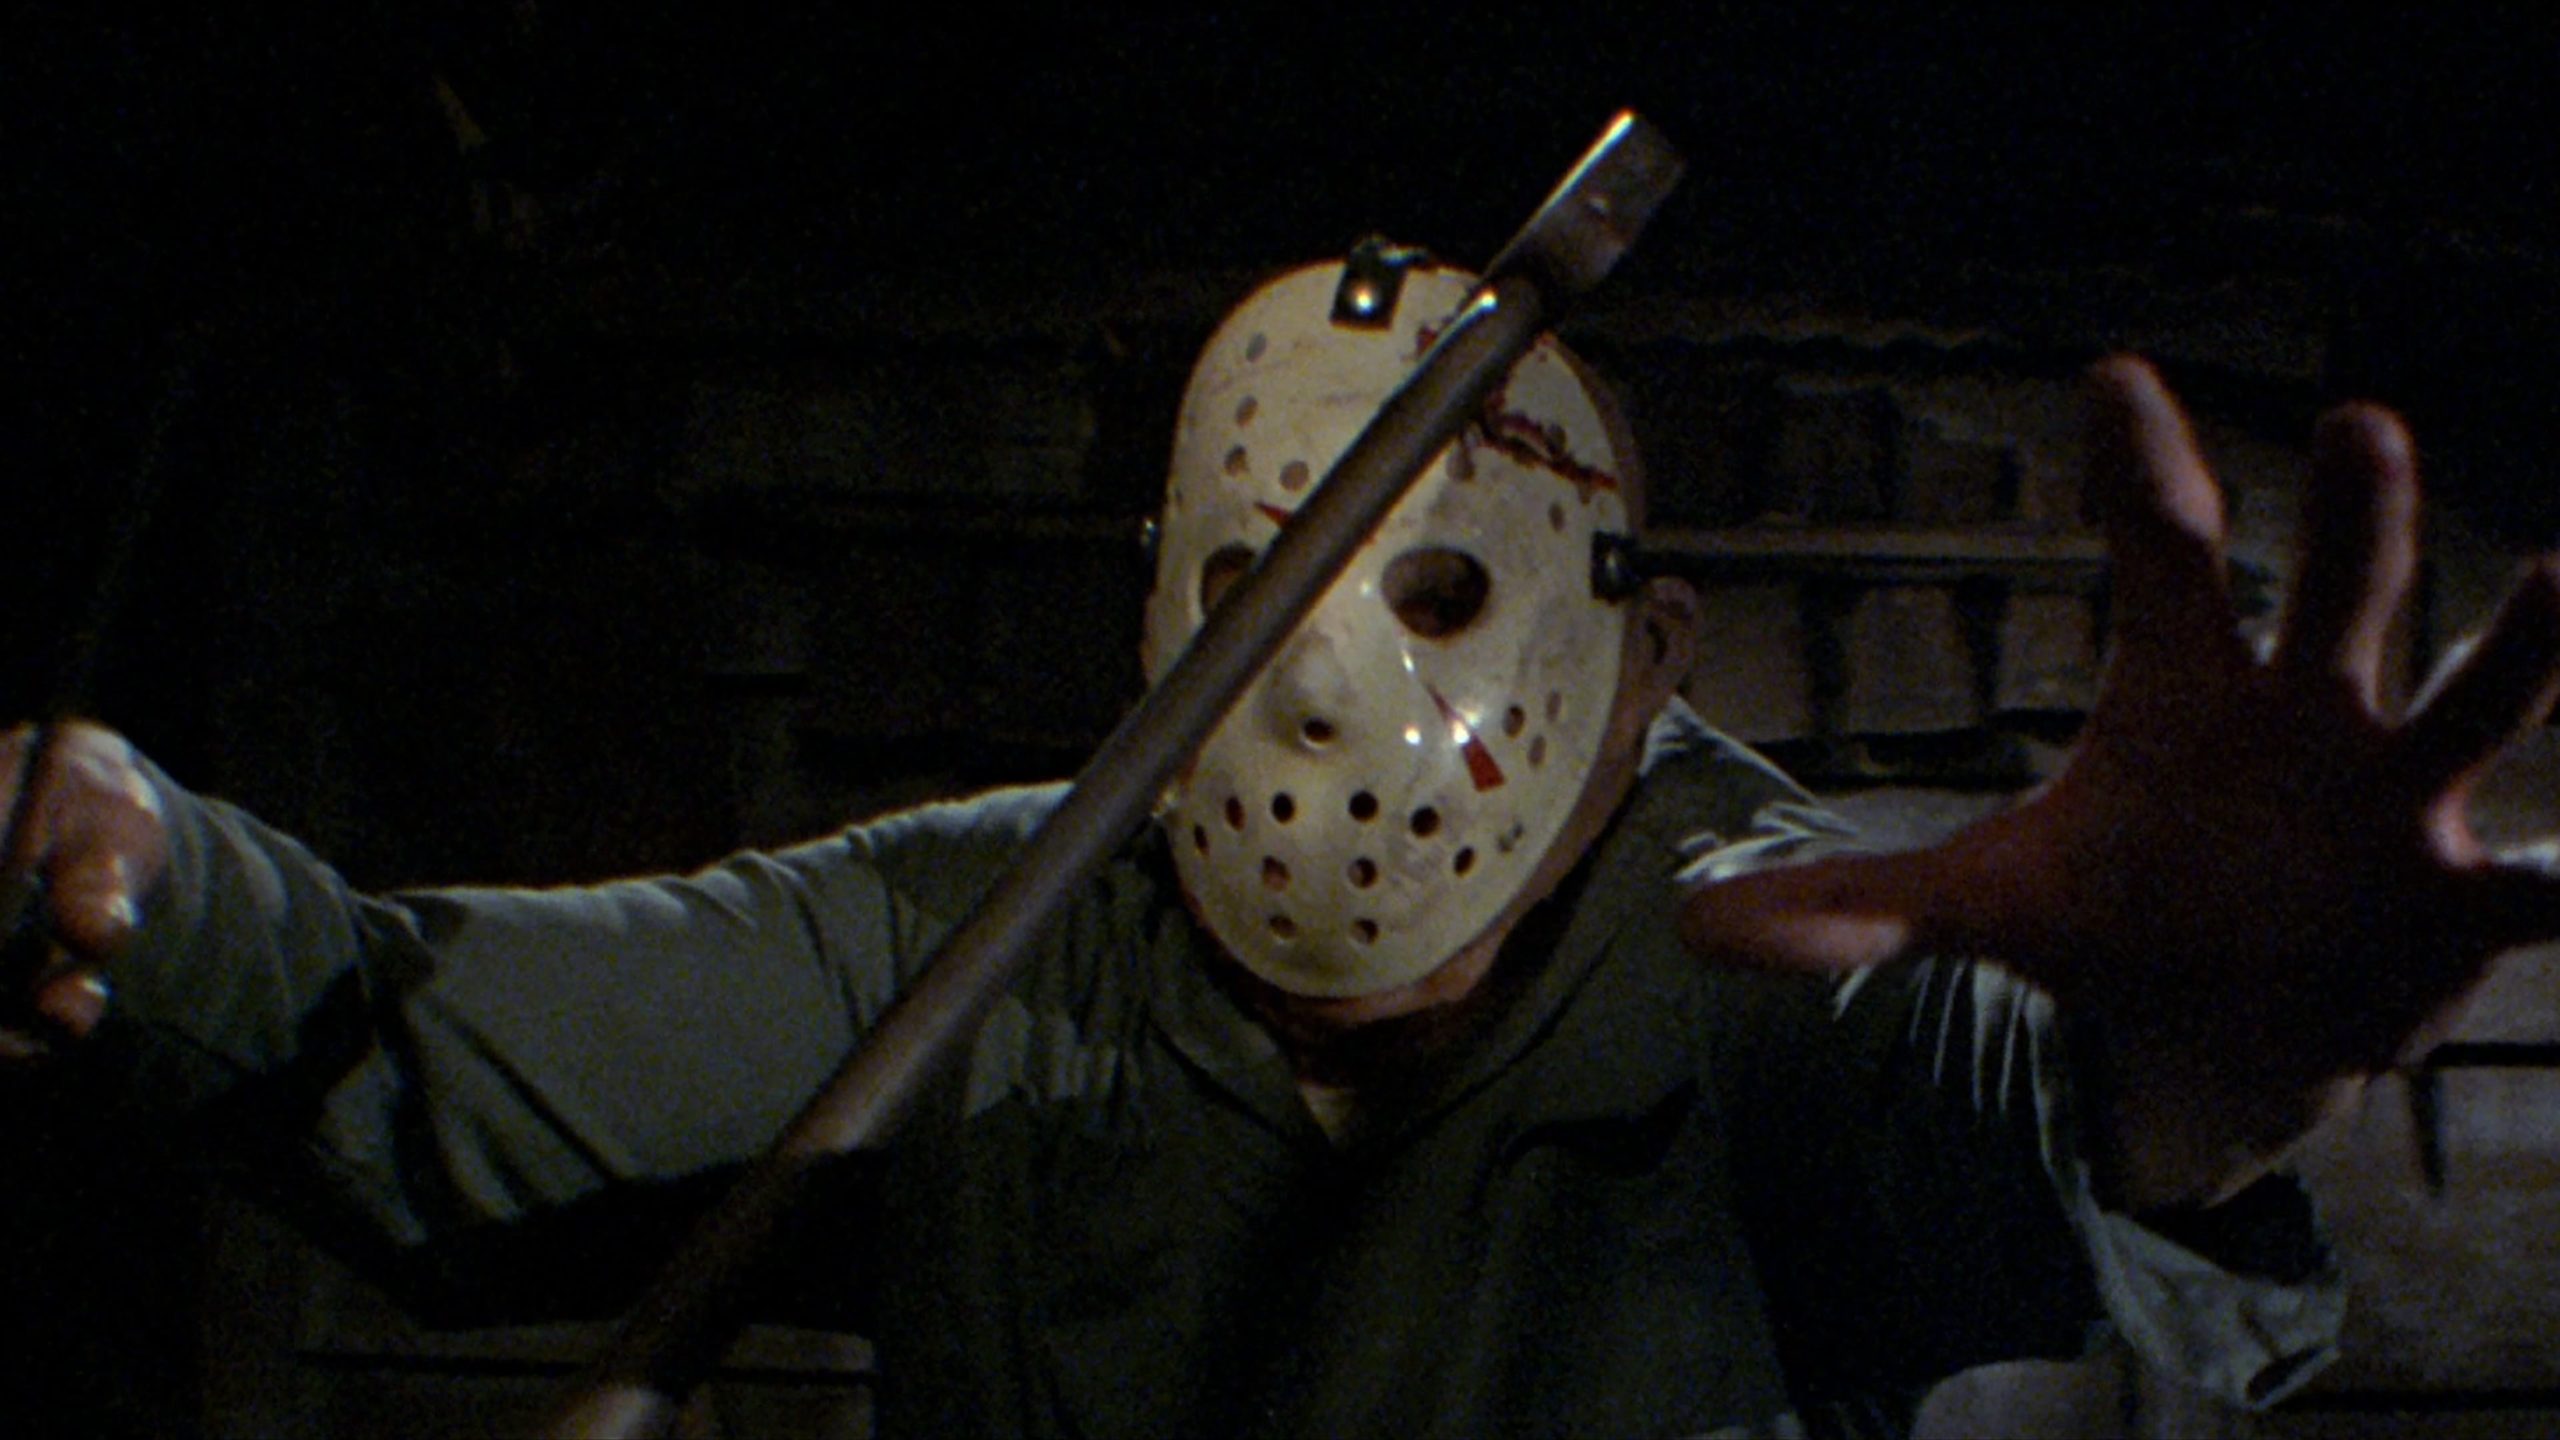 Friday the 13th, Part 3 backdrop